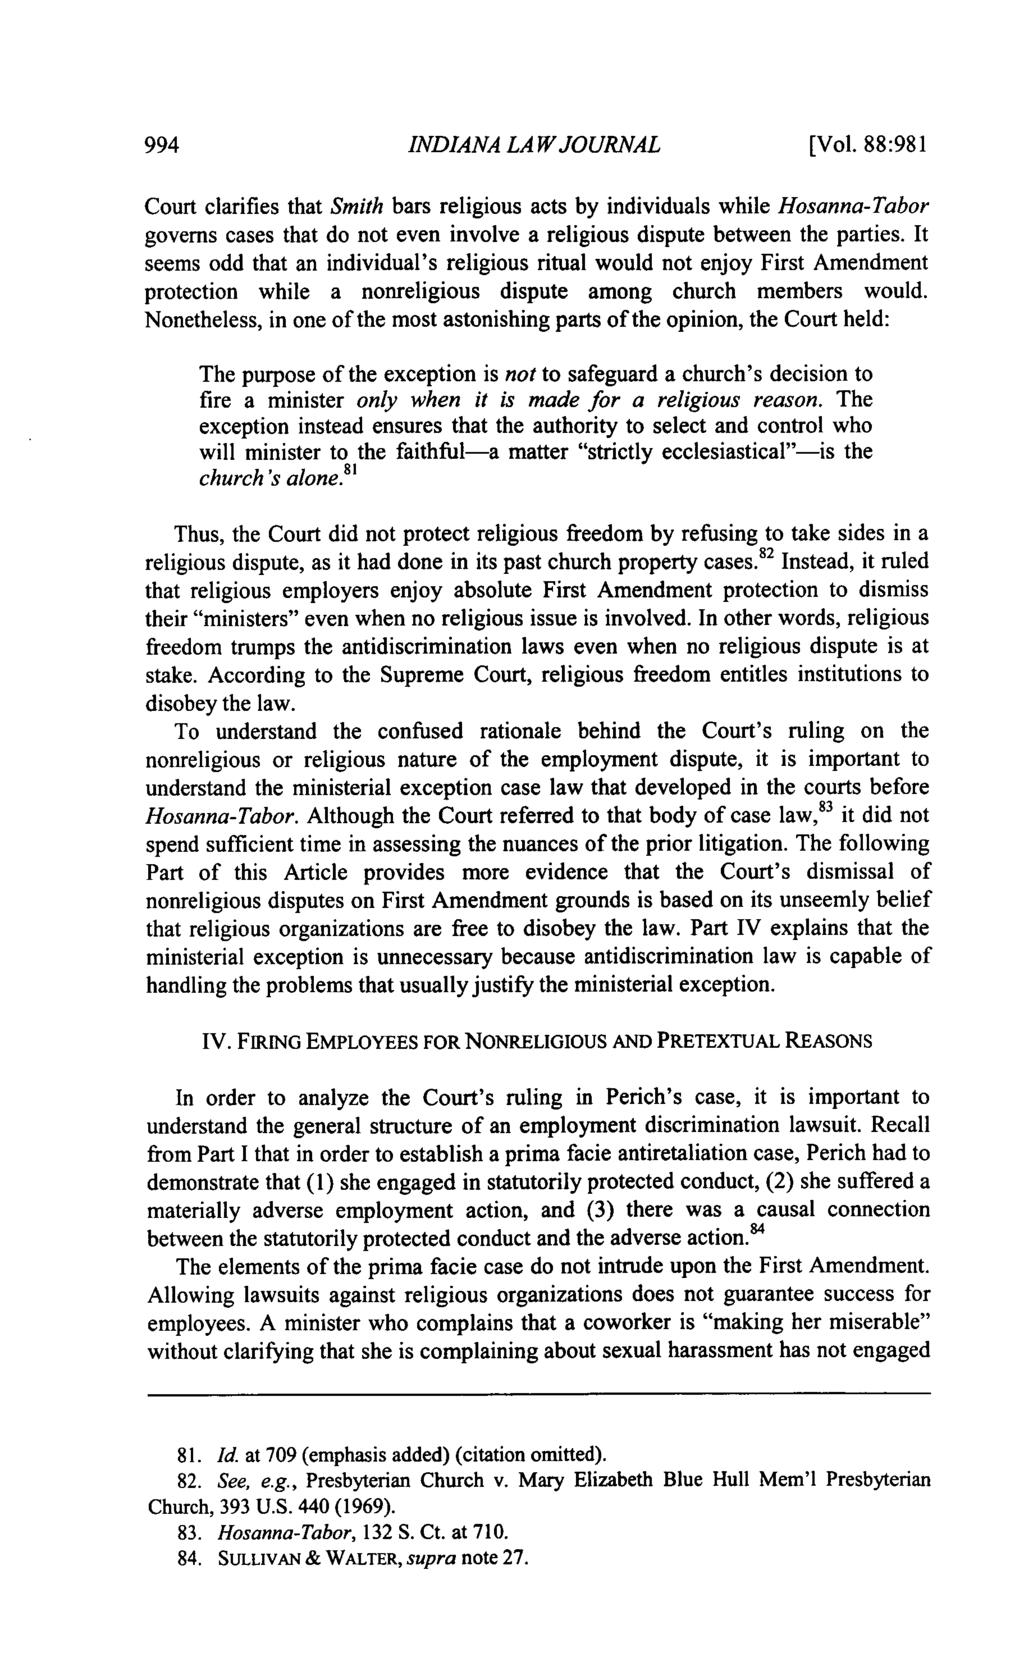 994 INDIANA LA WJOURNAL [Vol. 88:981 Court clarifies that Smith bars religious acts by individuals while Hosanna-Tabor governs cases that do not even involve a religious dispute between the parties.